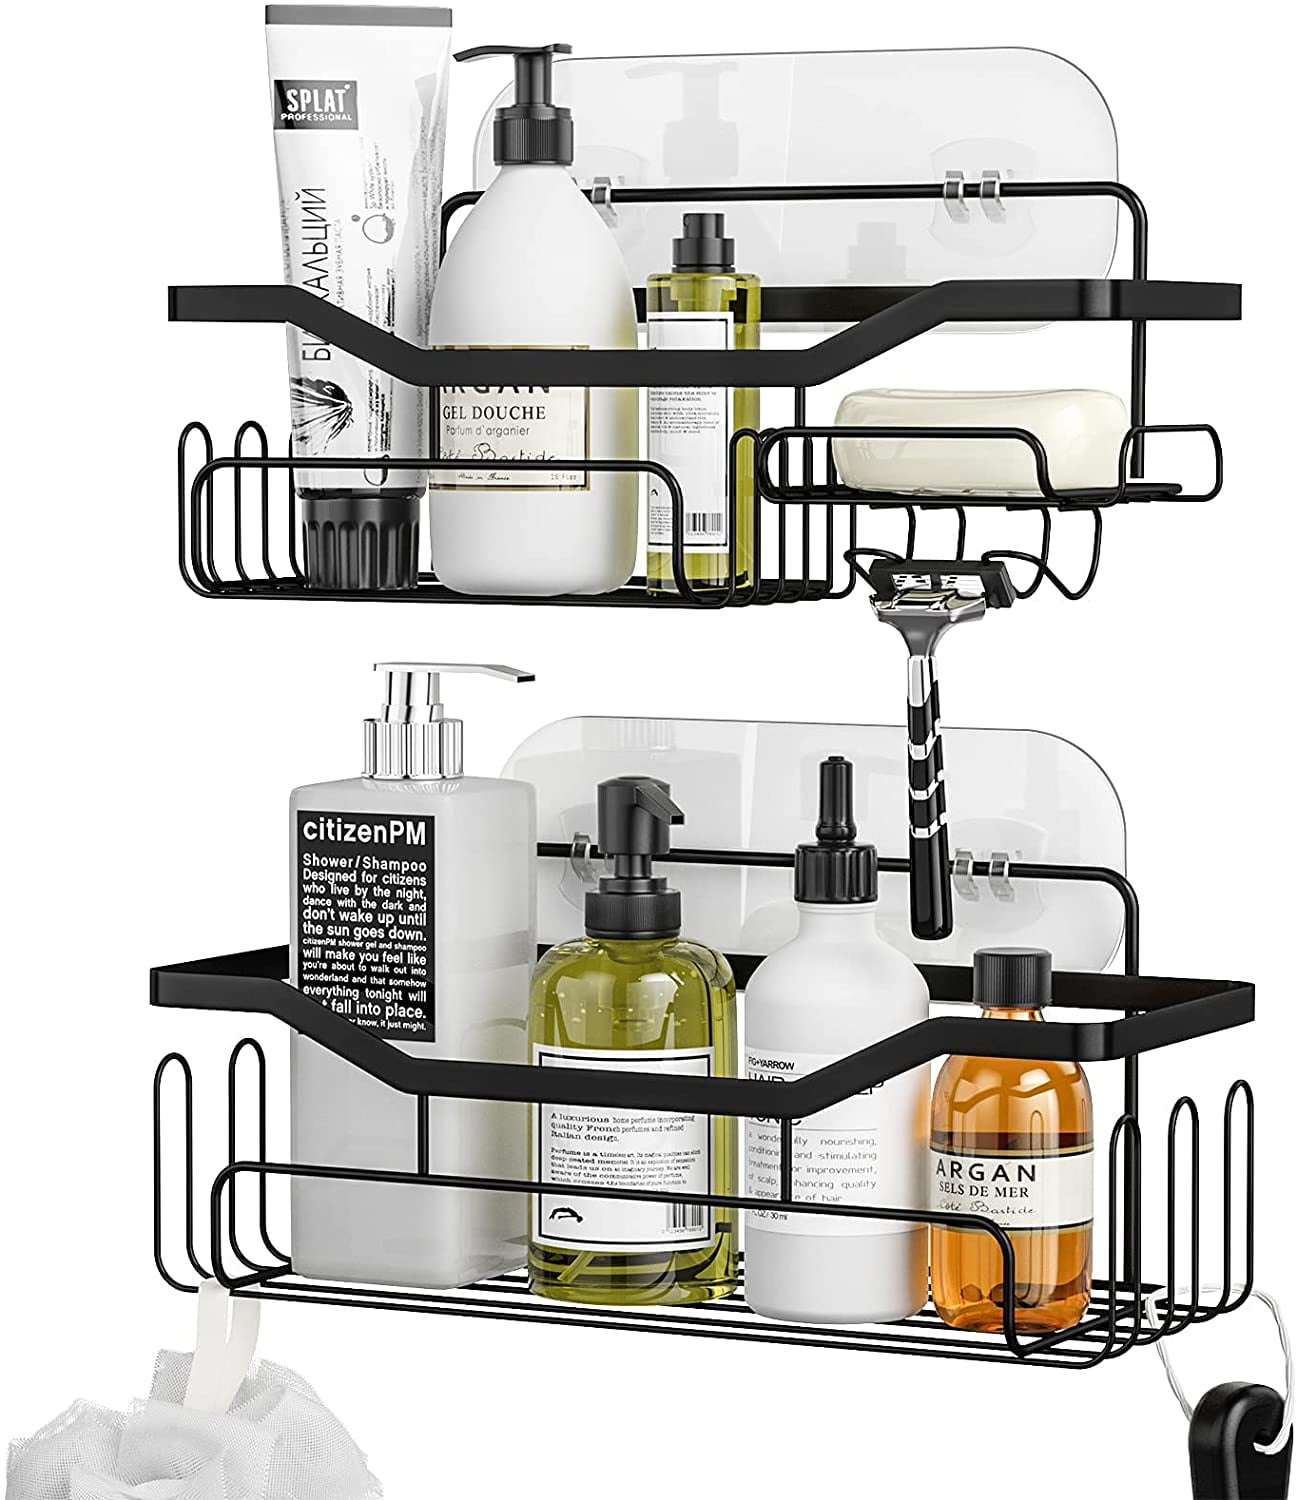 Dyiom Shower Caddy Shelf with 11 Hooks, Shower Rack for Hanging